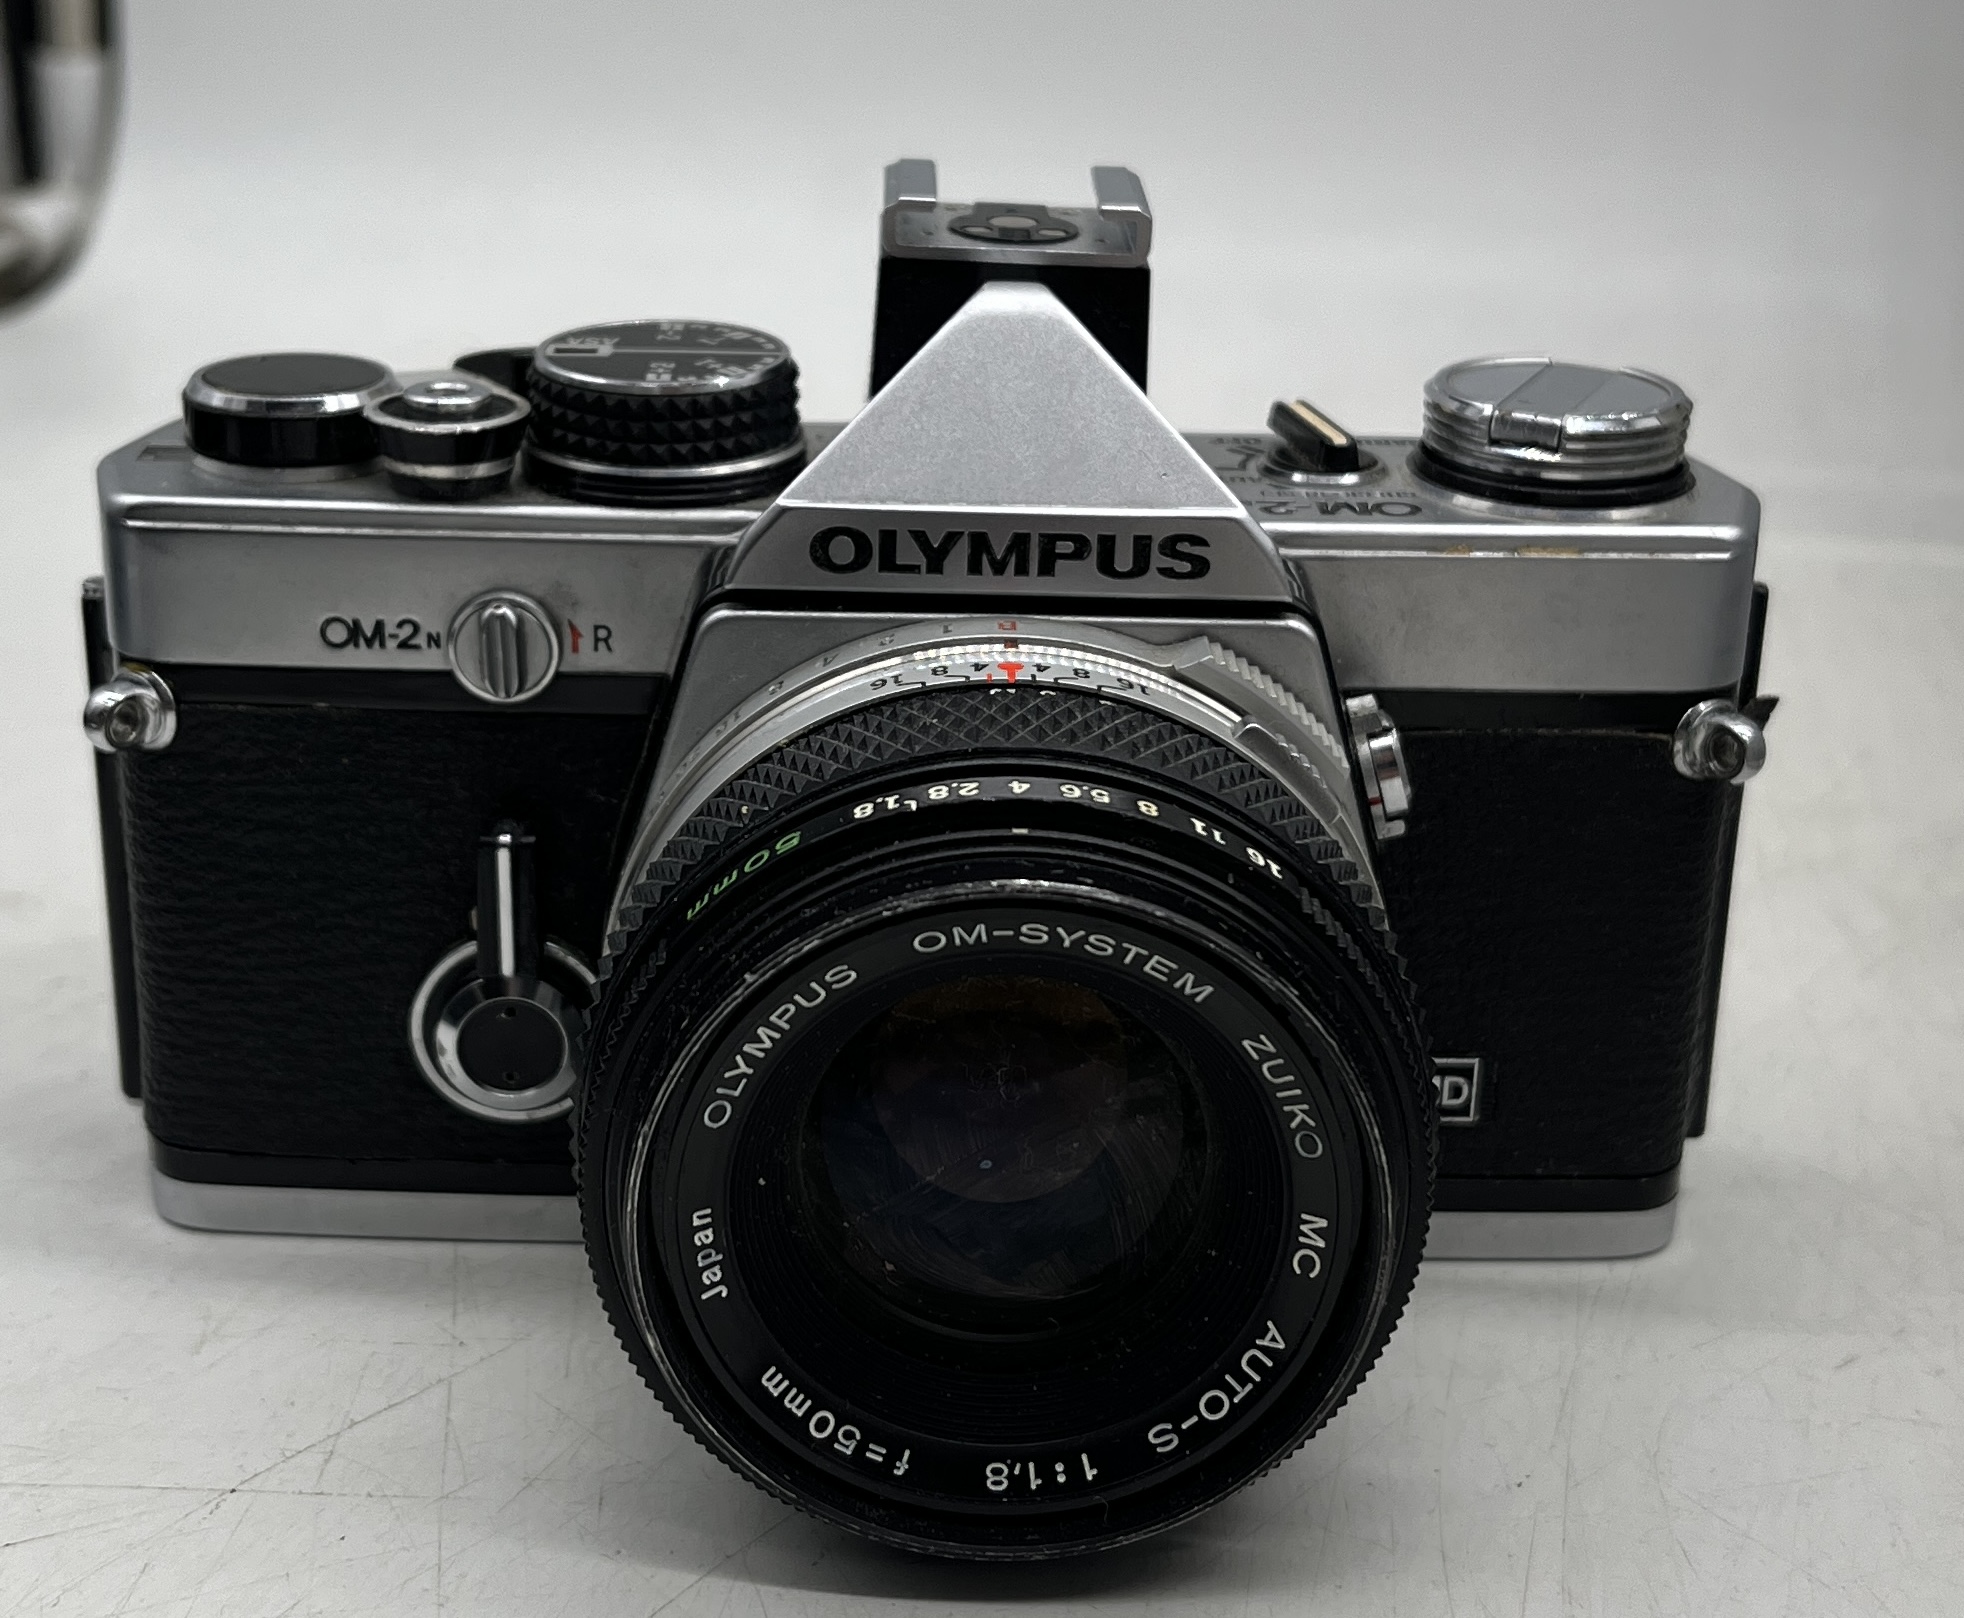 A cased collection of cameras, lenses and accessories including Olympus OM-2, Olympus OM-4 etc. - Image 4 of 7